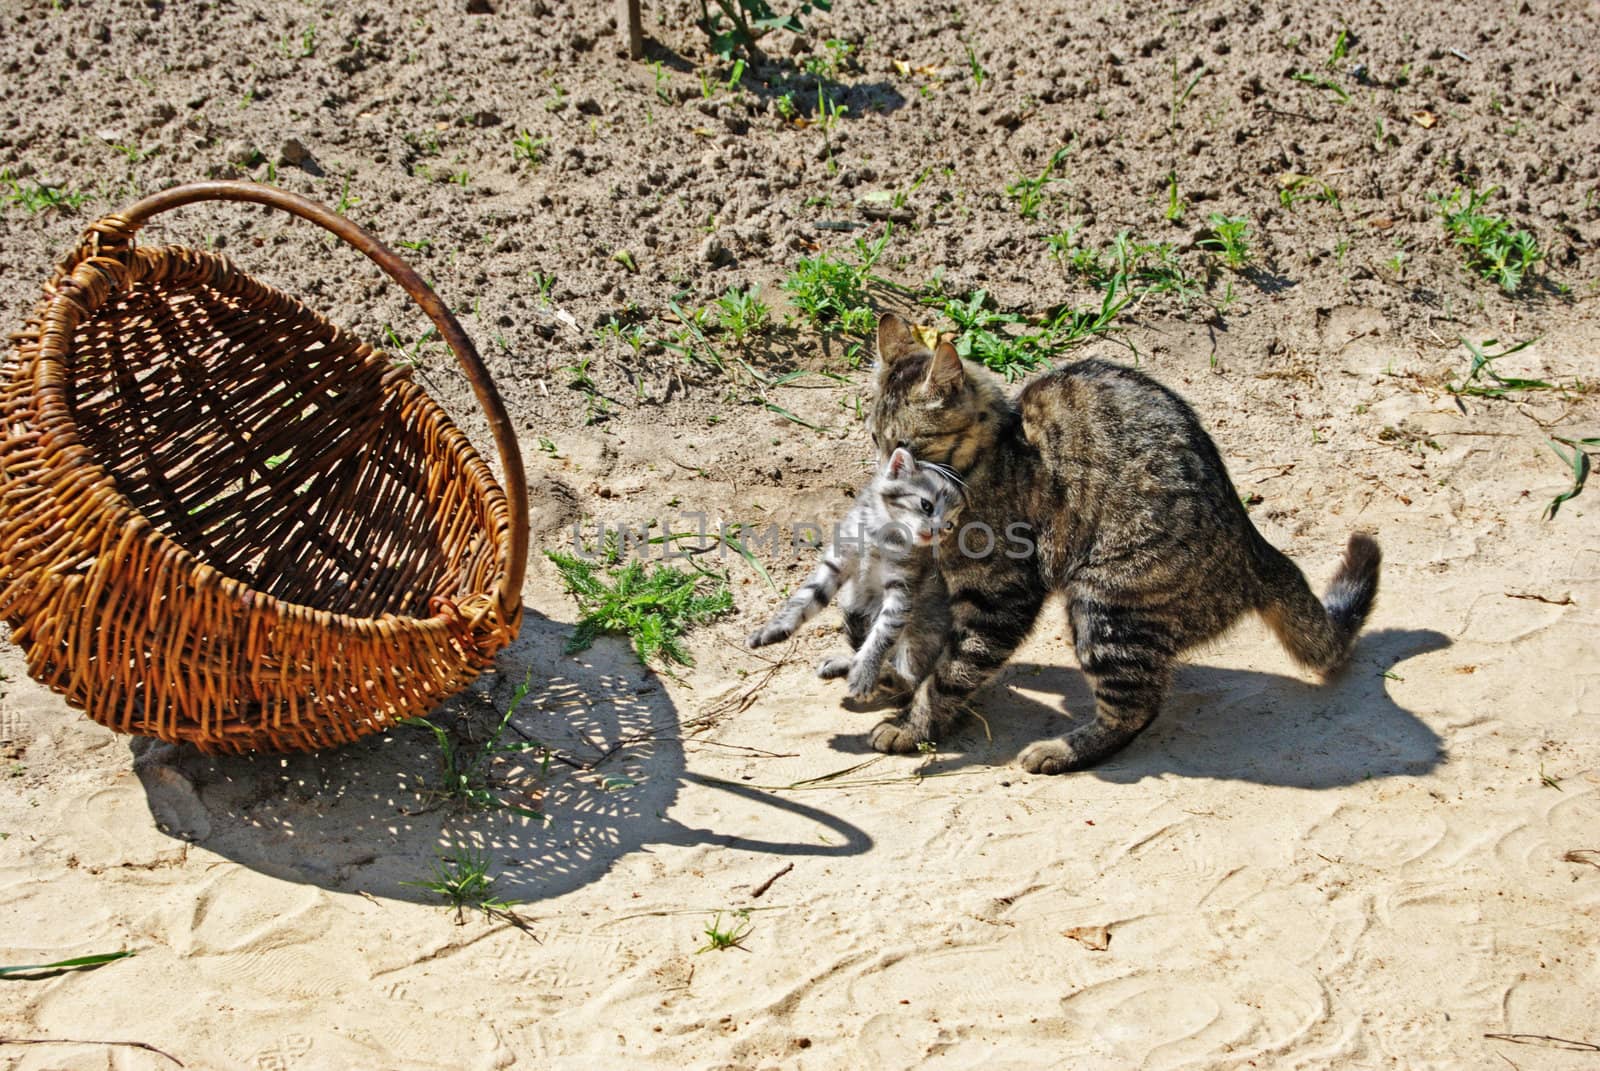 A lady-cat extracted a kitten from his native home (baskets) and takes away in more secluded place.